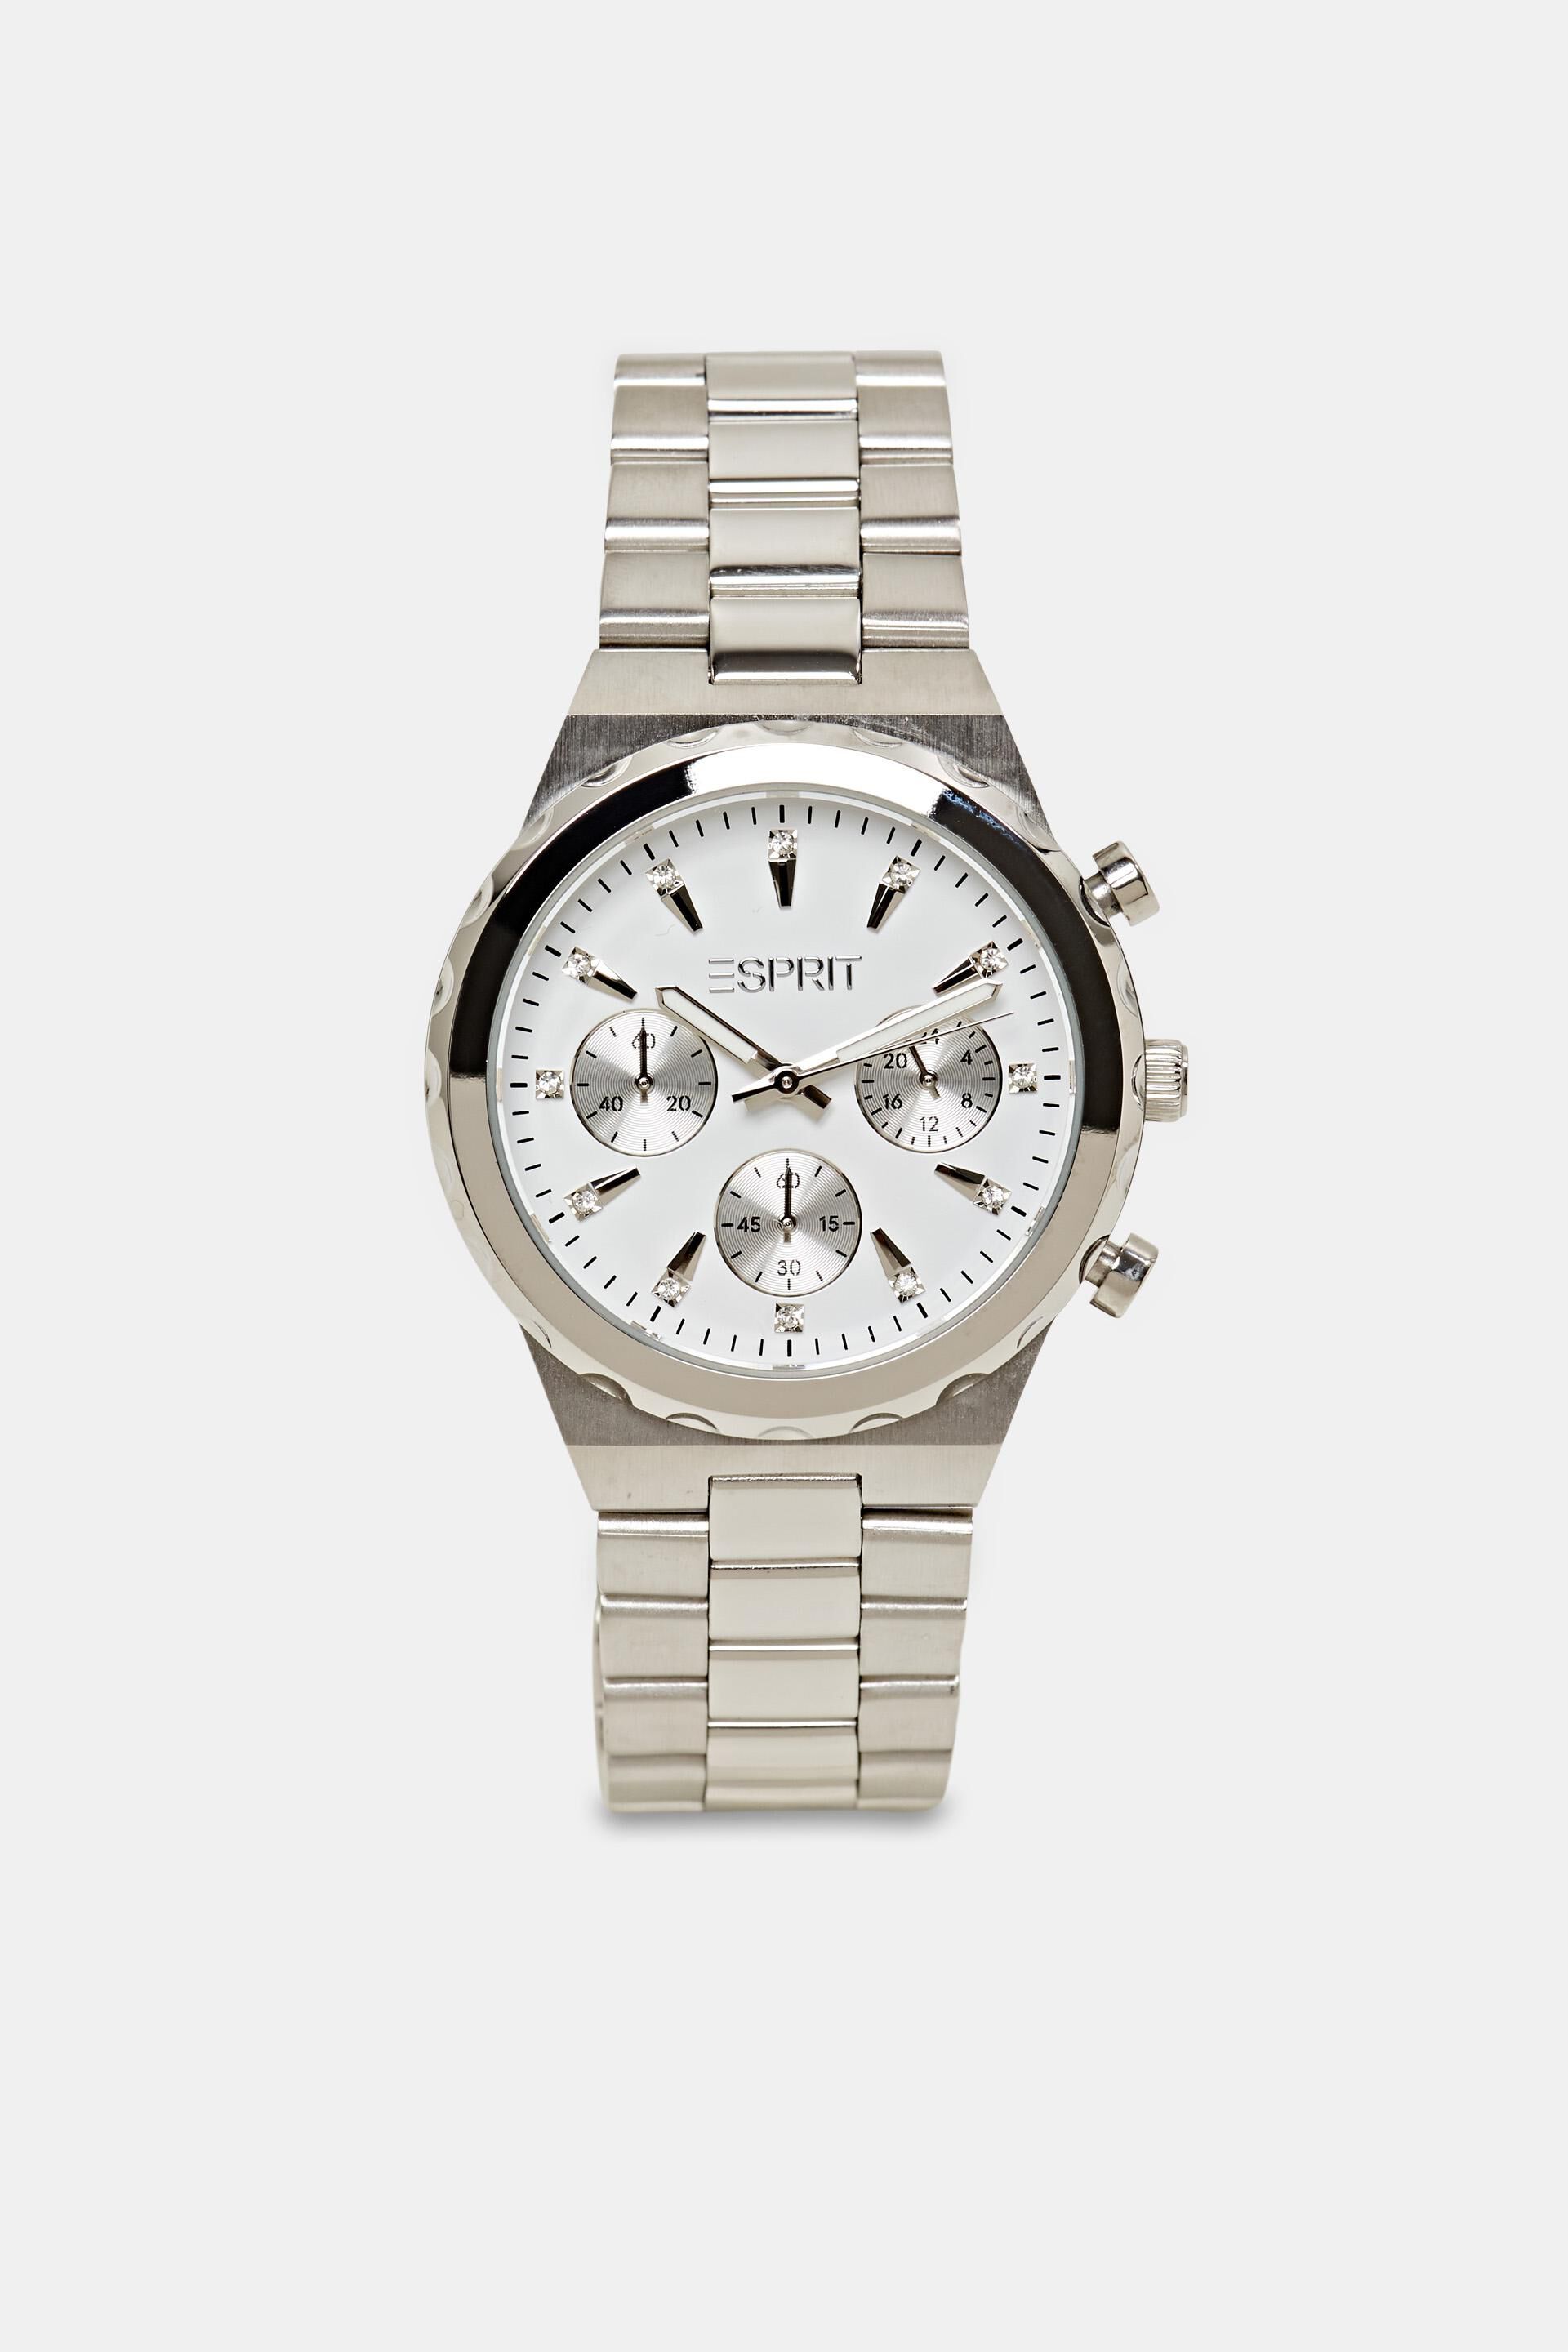 Esprit Online Store Stainless-steel chronograph with a link bracelet